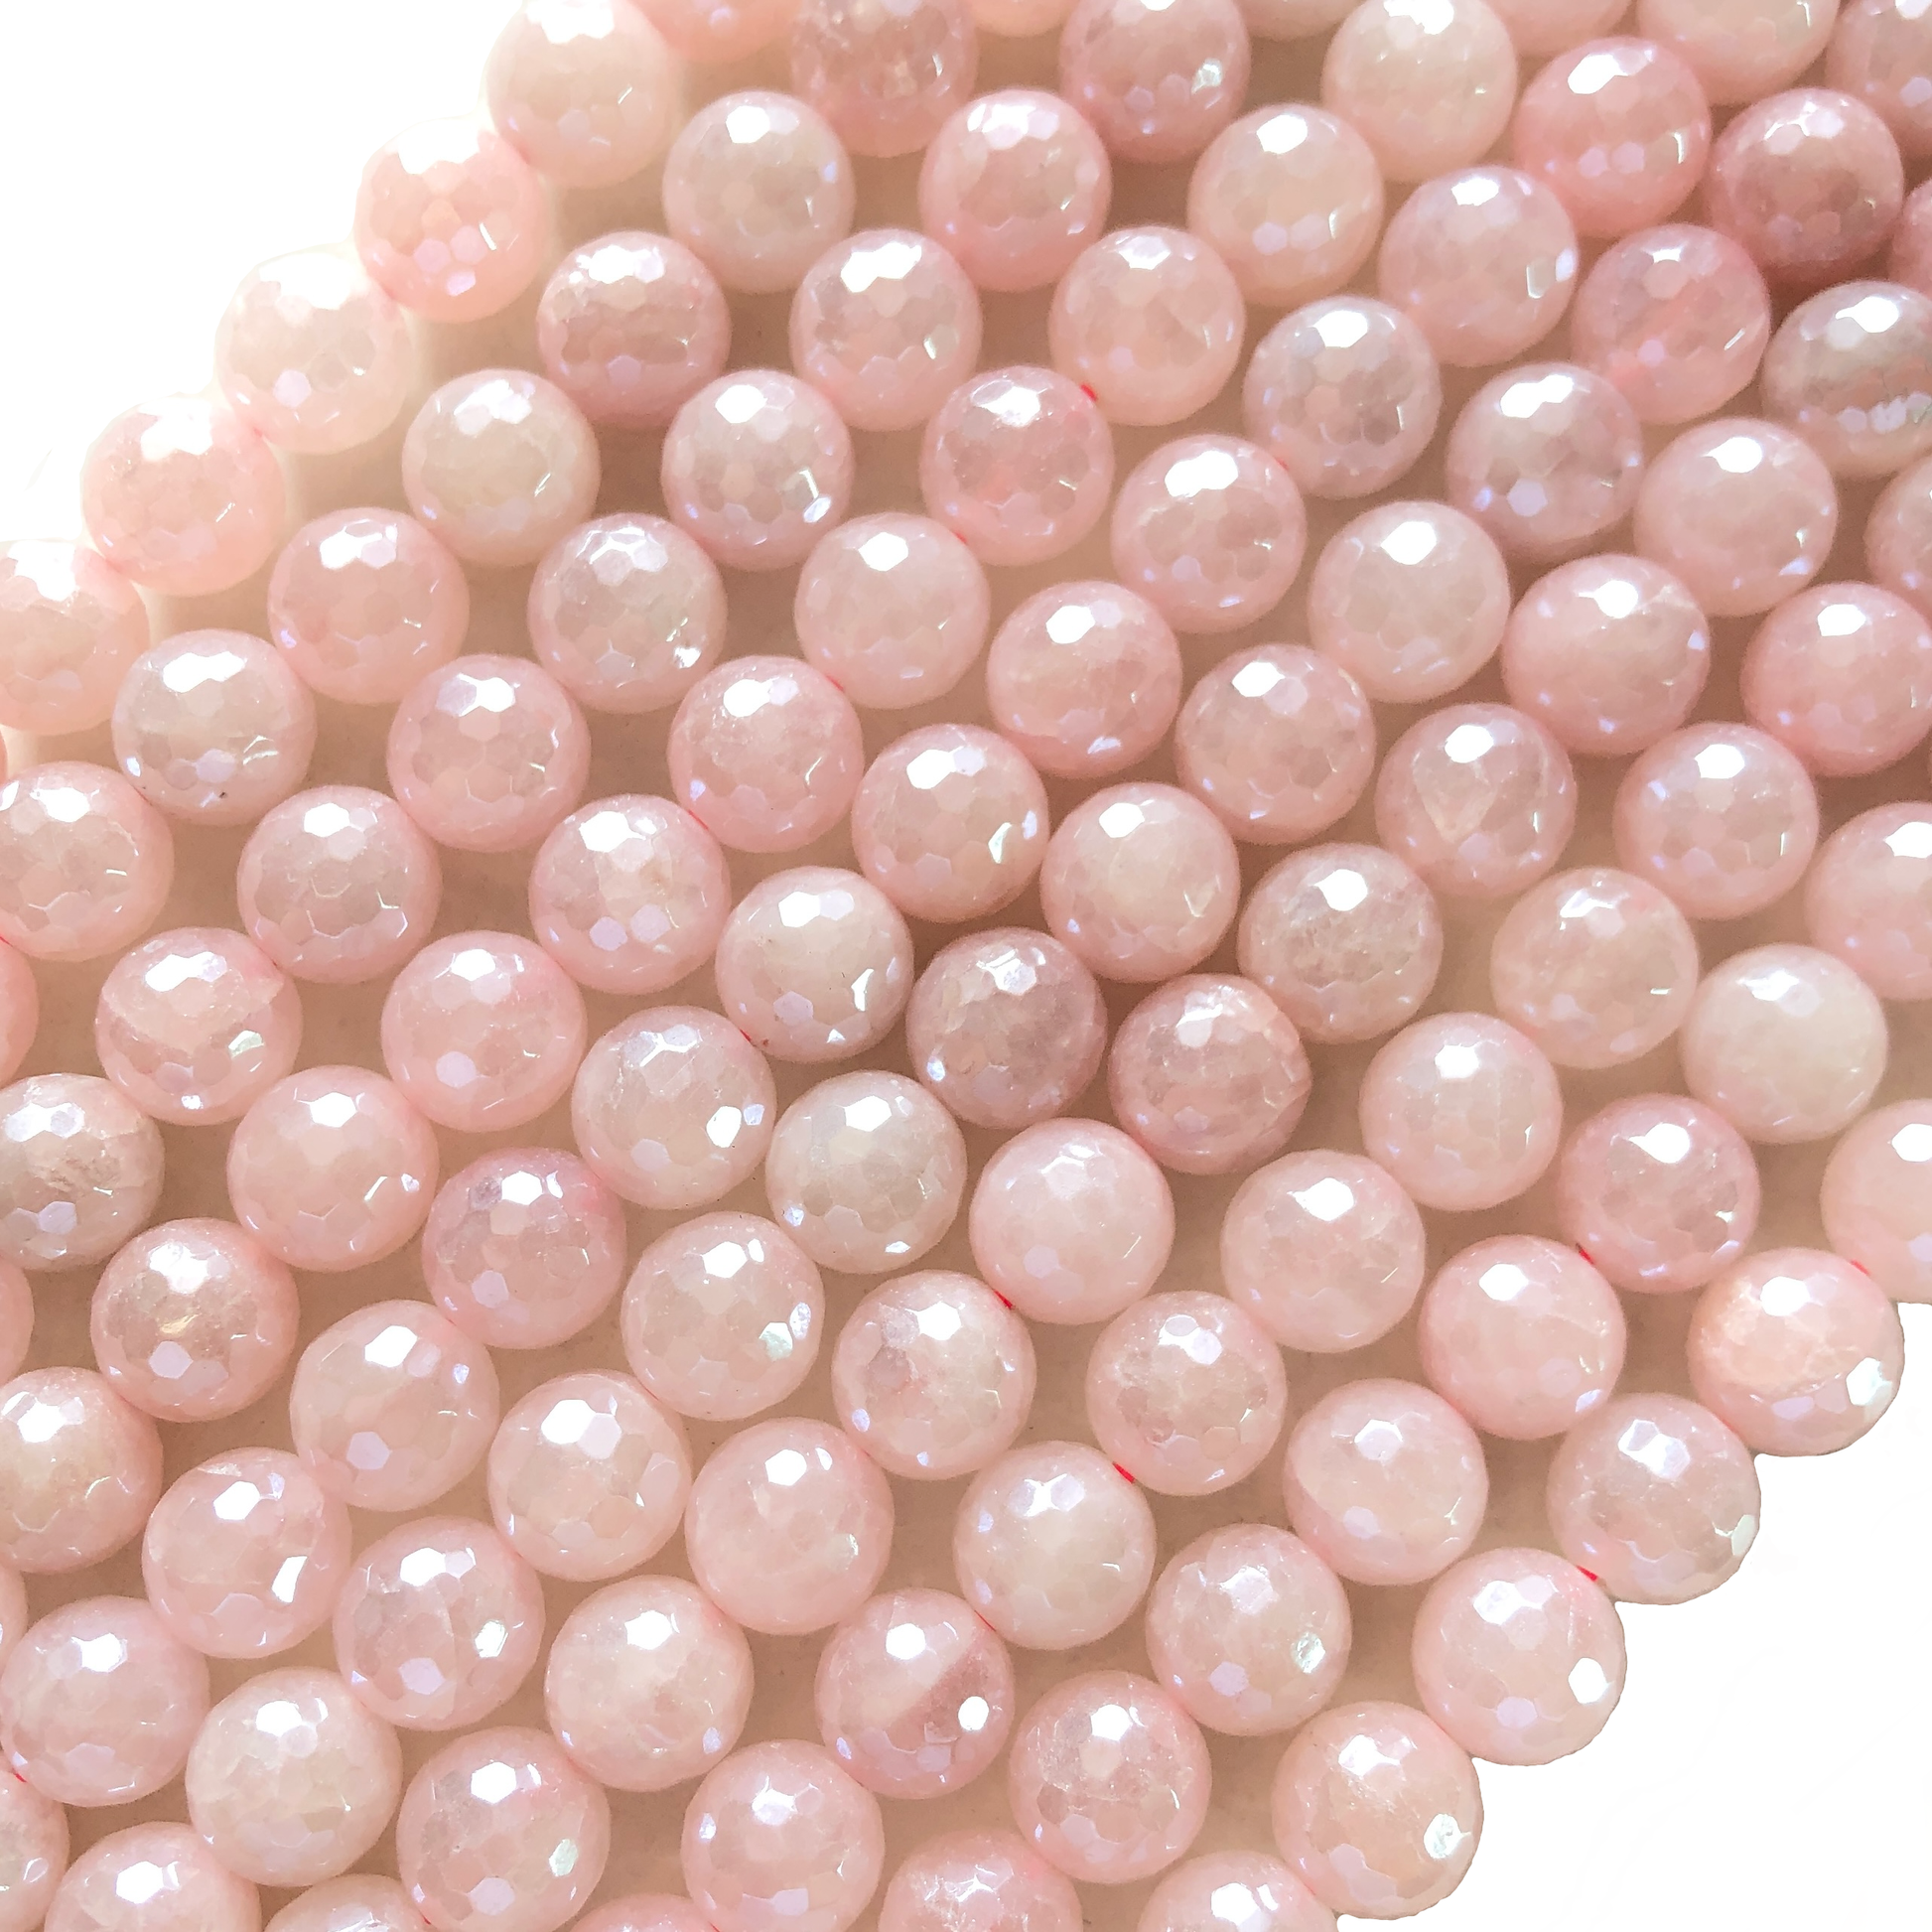 10, 12mm Electroplated Rose Quartz Stone Faceted Beads-Grade A Premium Quality Electroplated Beads 12mm Stone Beads New Beads Arrivals Premium Quality Agate Beads Charms Beads Beyond